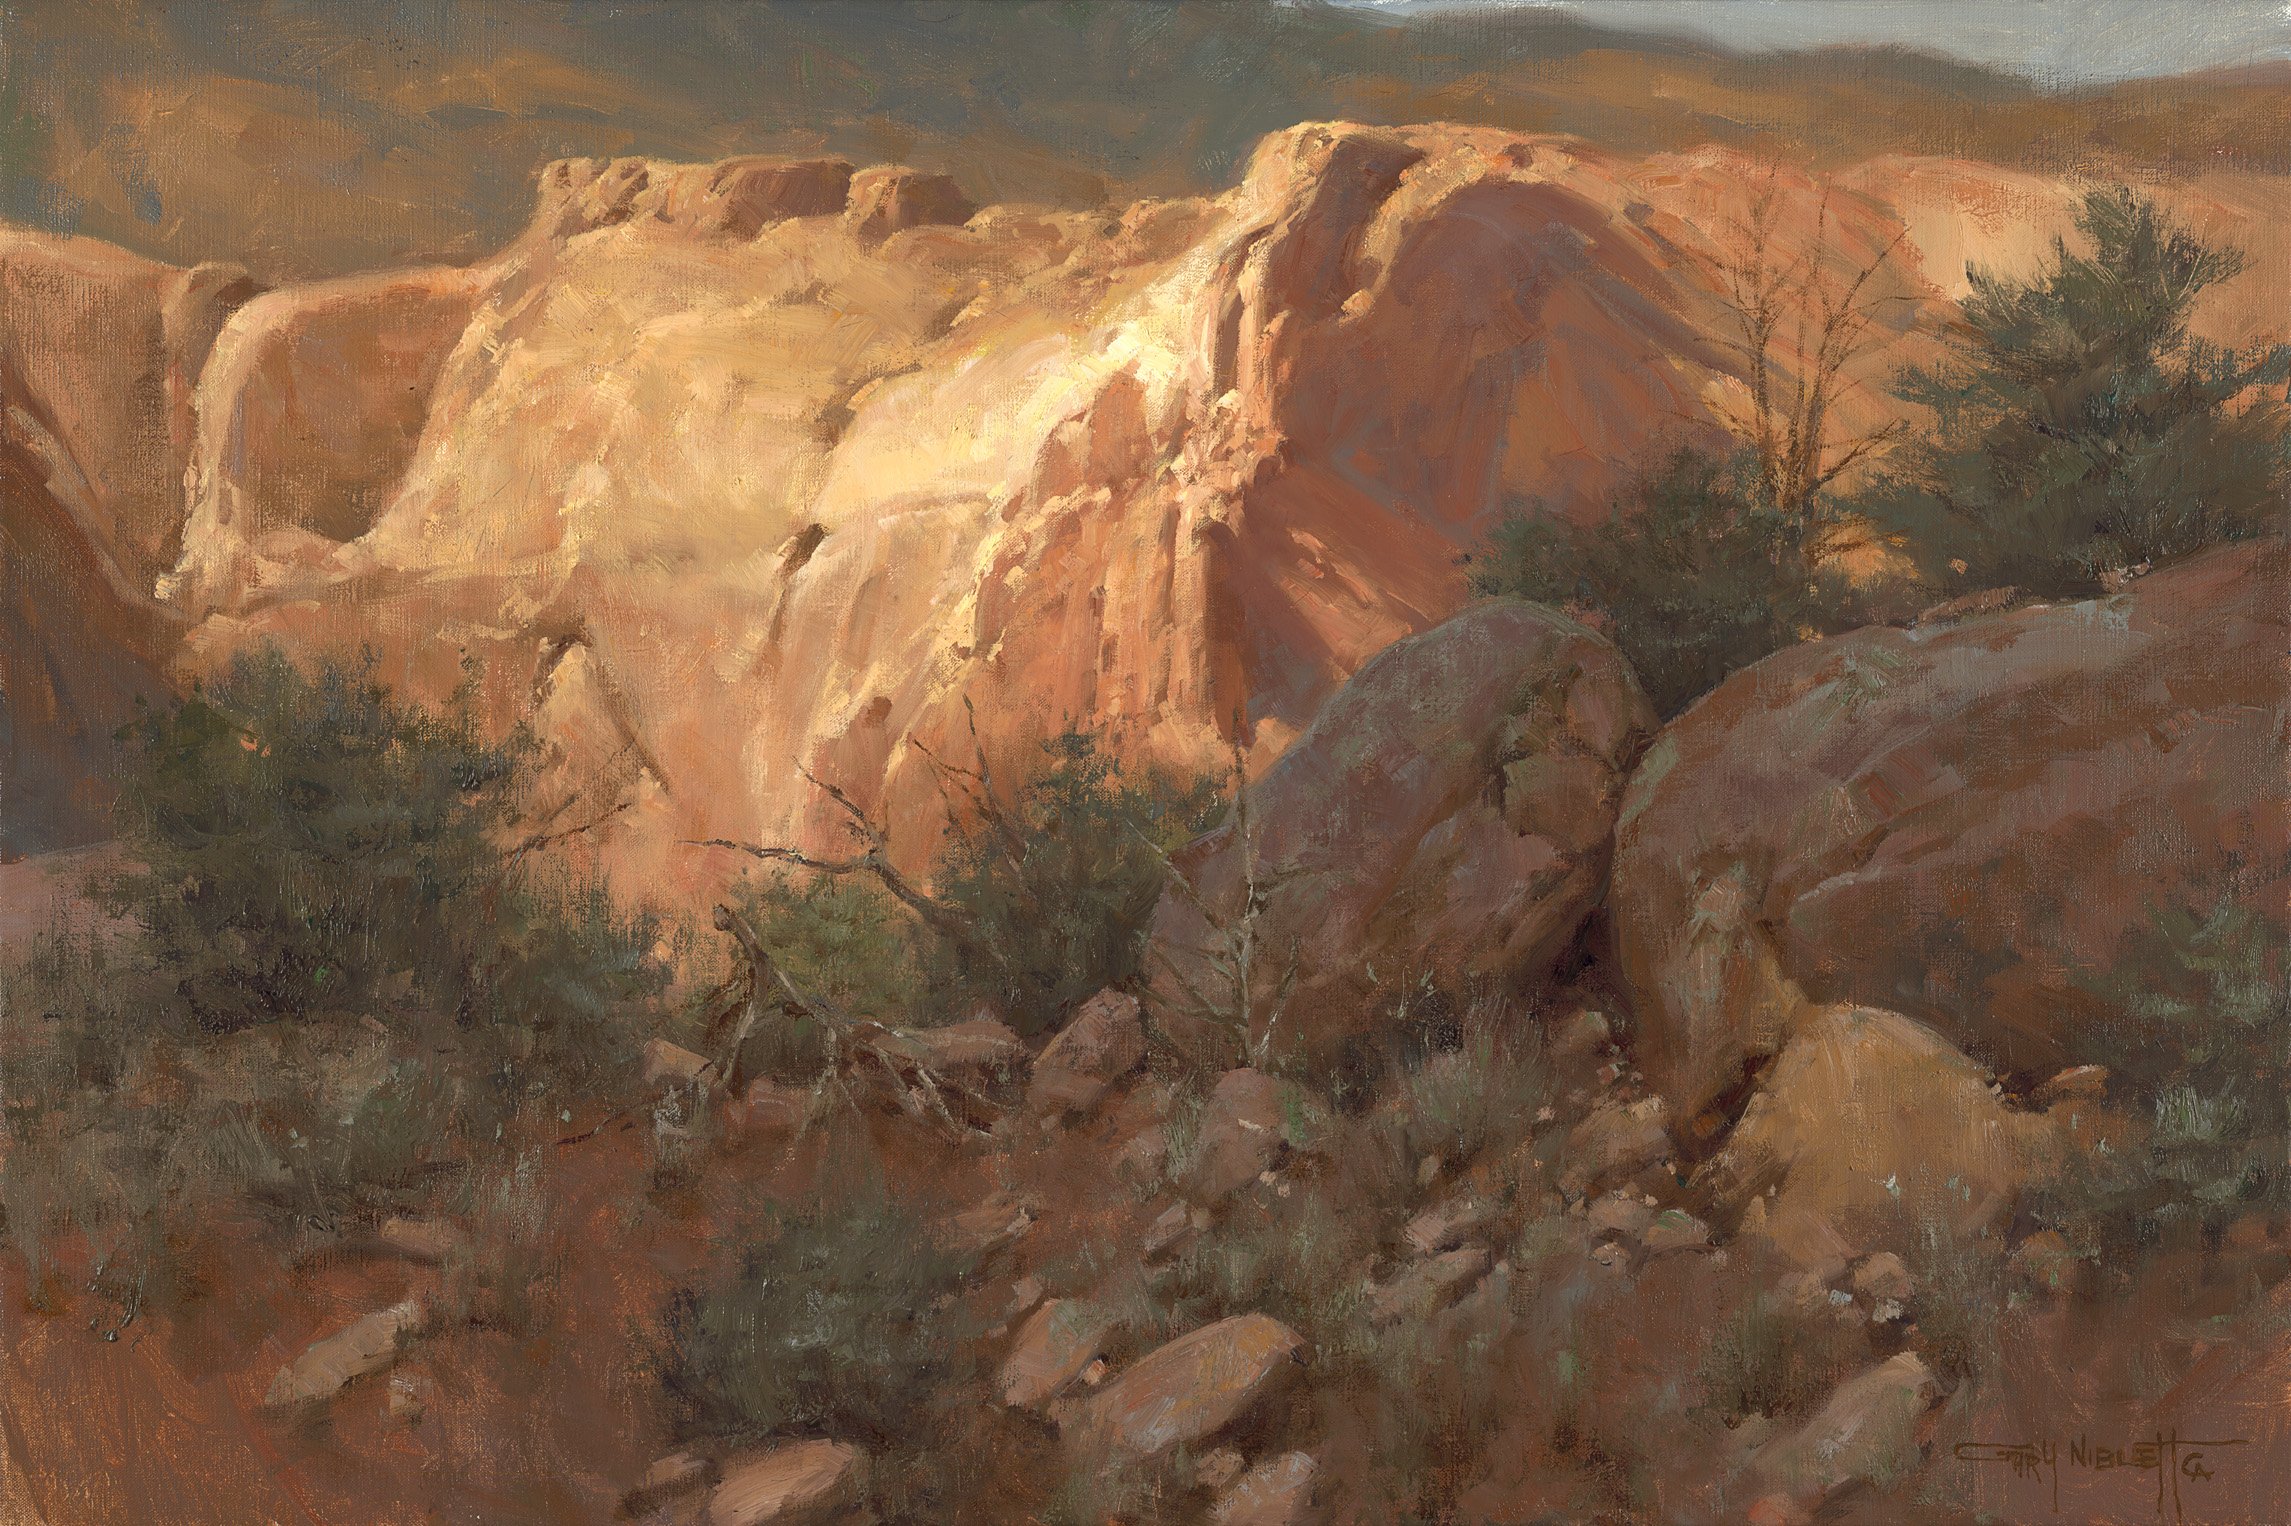   Gary Niblett  -  The Lure of Ghost Ranch  